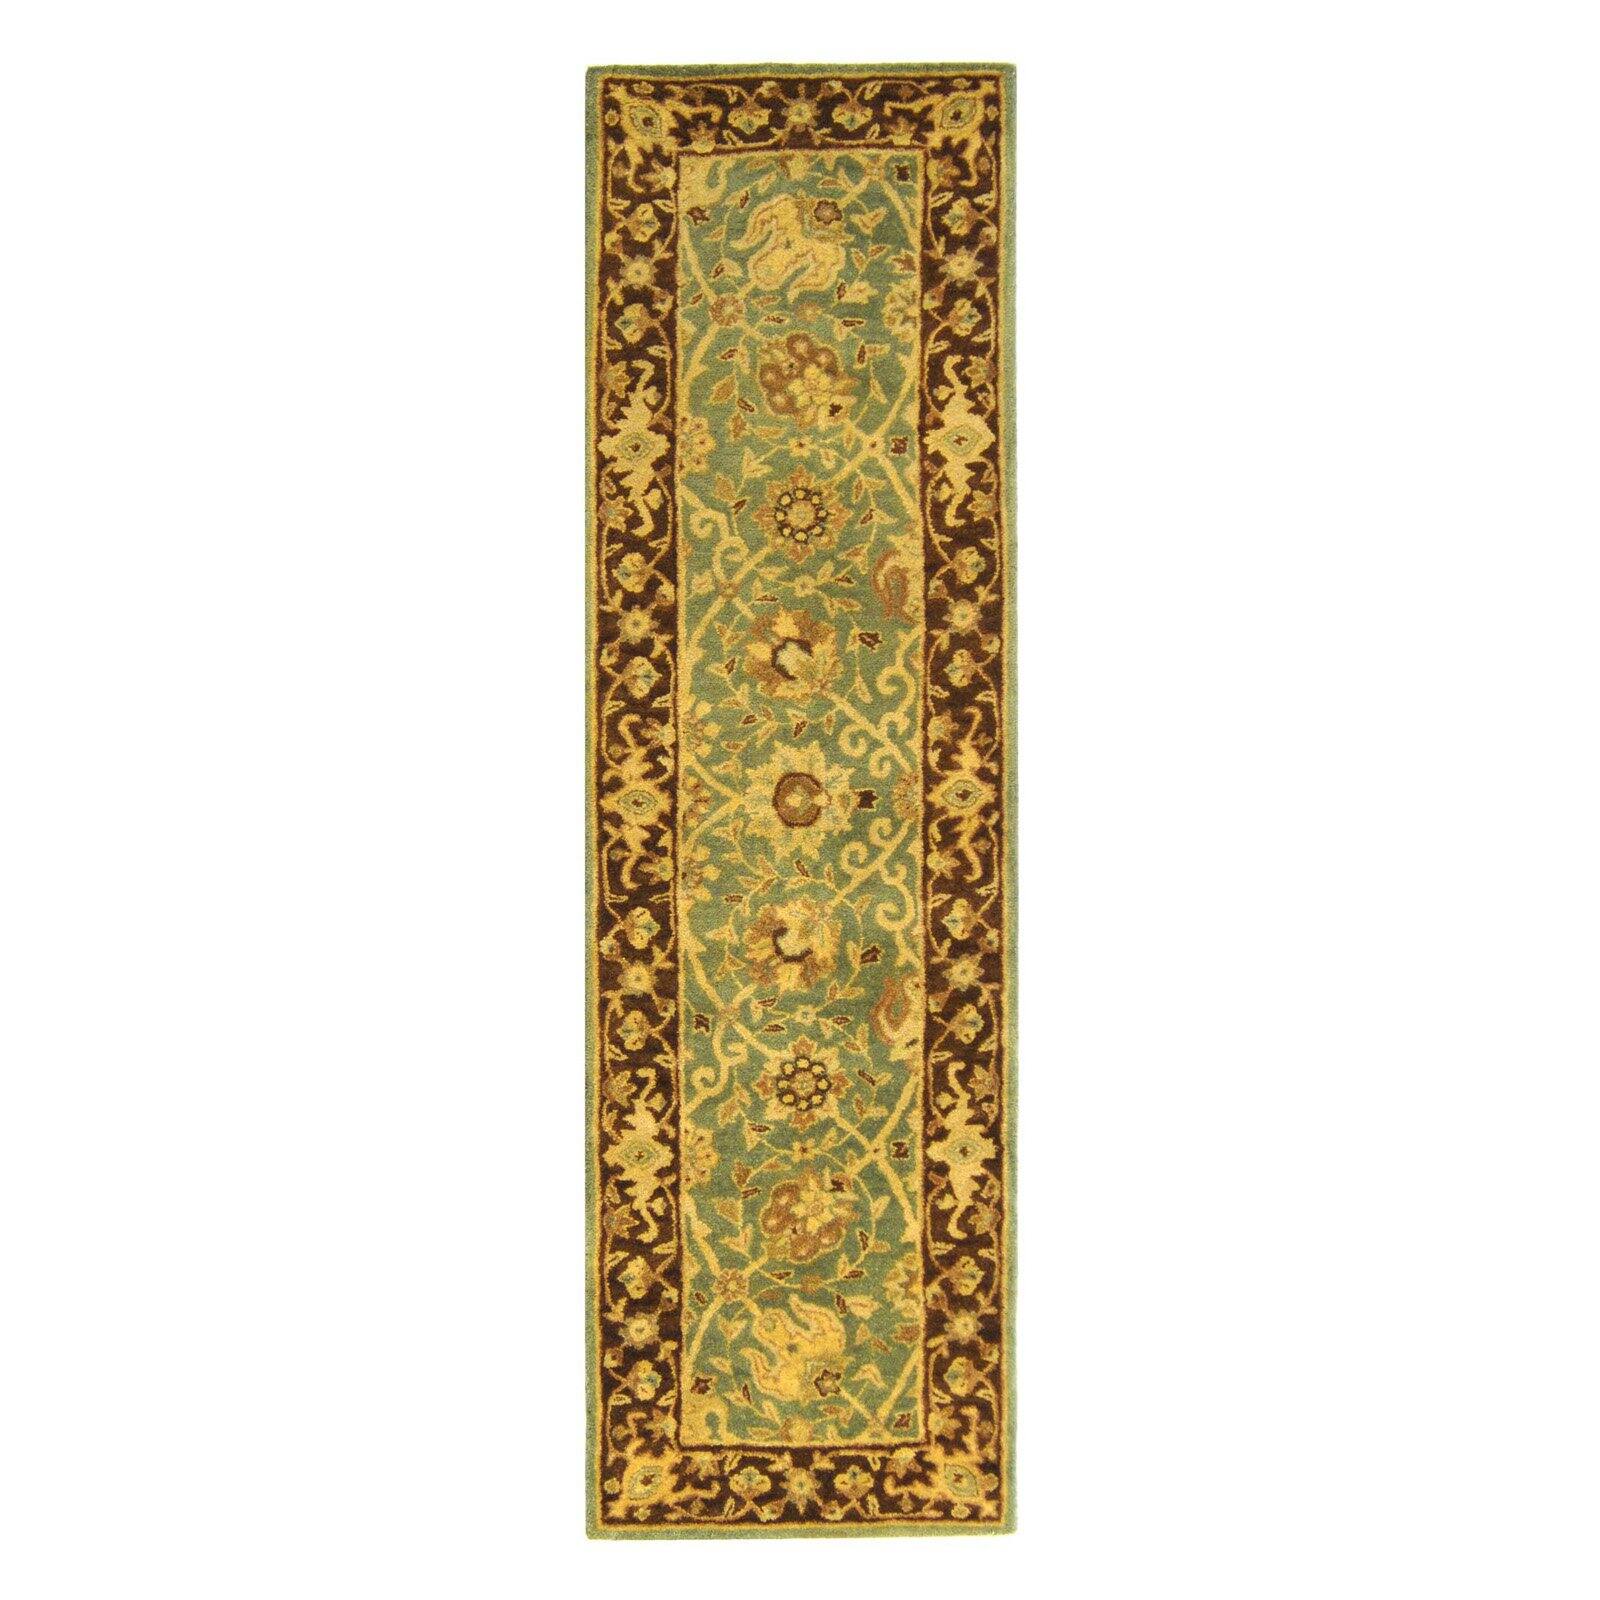 SAFAVIEH Antiquity Lilibeth Traditional Floral Wool Runner Rug, Green/Brown, 2'3" x 8' - image 2 of 8